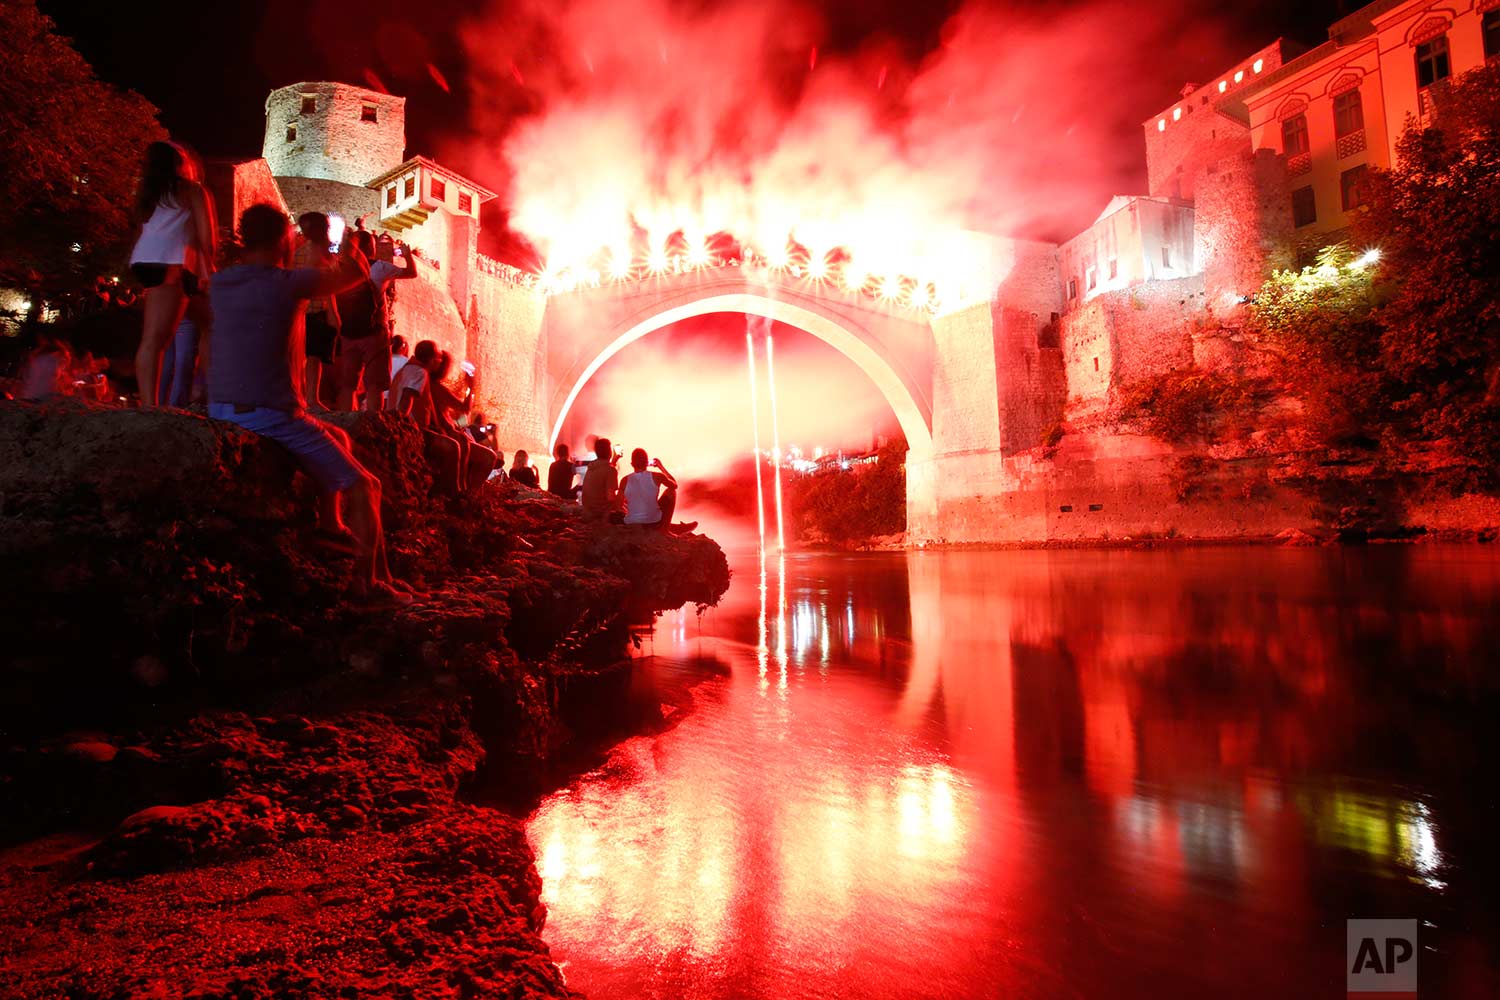  In this Sunday, July 30, 2017 photo, a Bosnian jumper, launches himself while holding burning torches, during traditional night jump from the Old Mostar Bridge, in Mostar, 140 kms south of Bosnian capital of Sarajevo. A total of 41 divers from Bosni